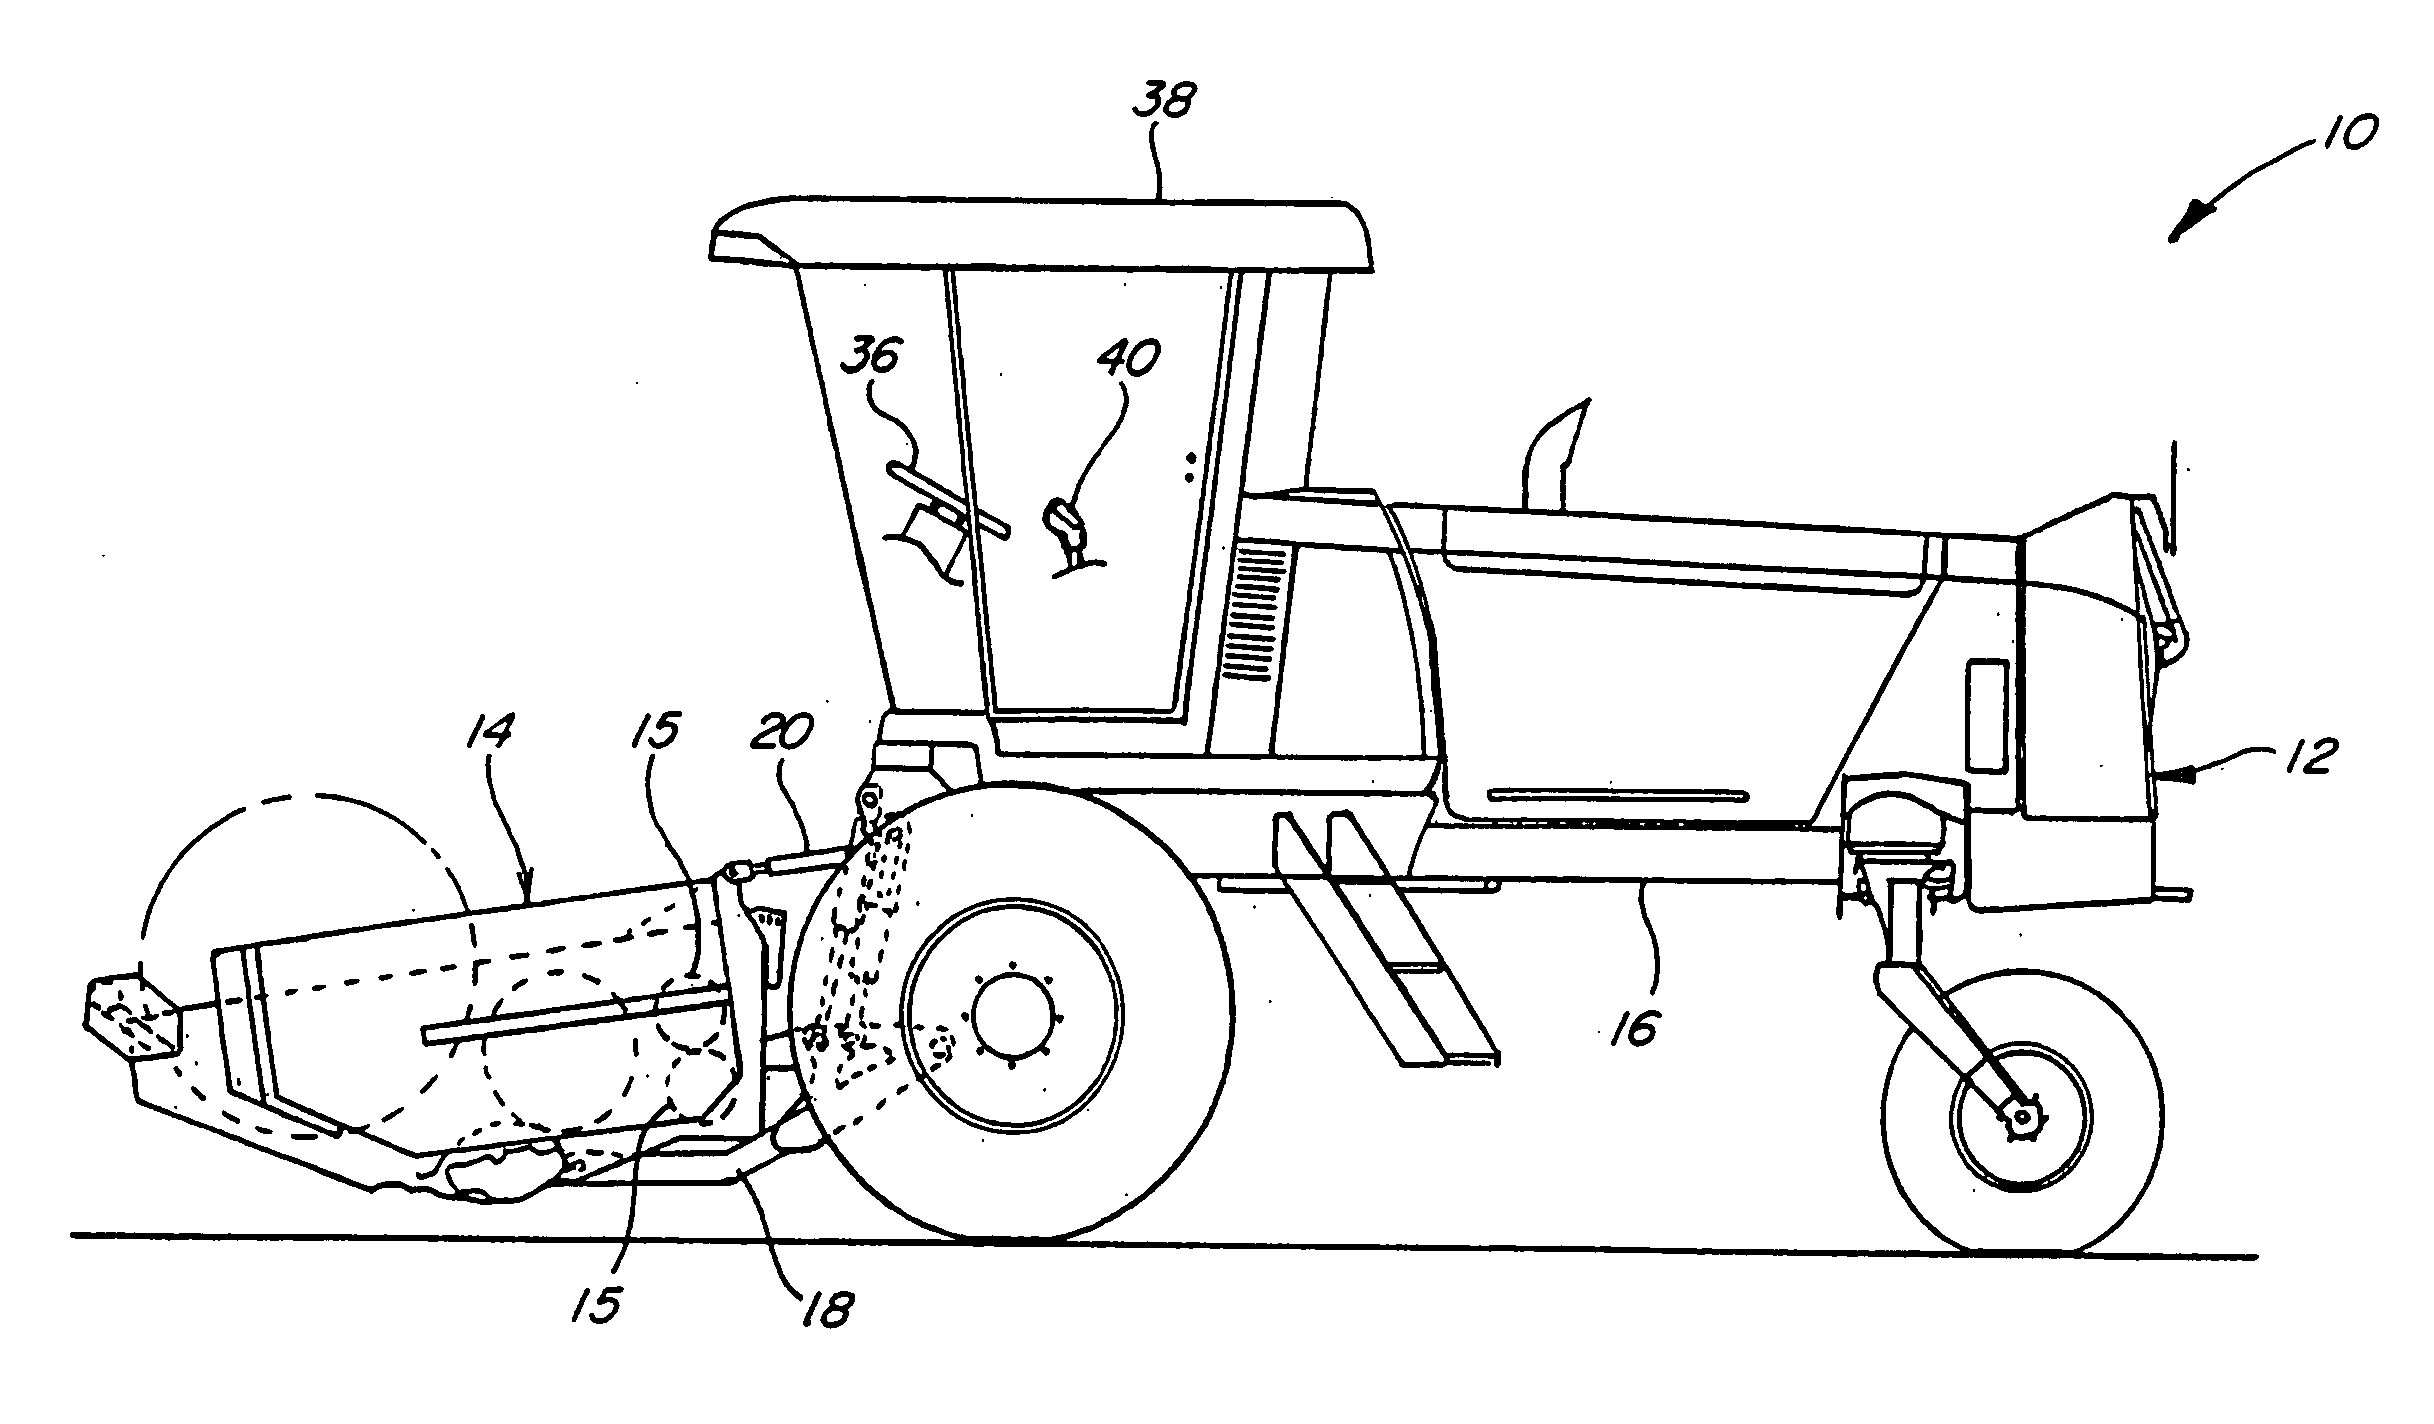 Apparatus and method providing neutral safeing for the propulsion system of an agricultural windrower